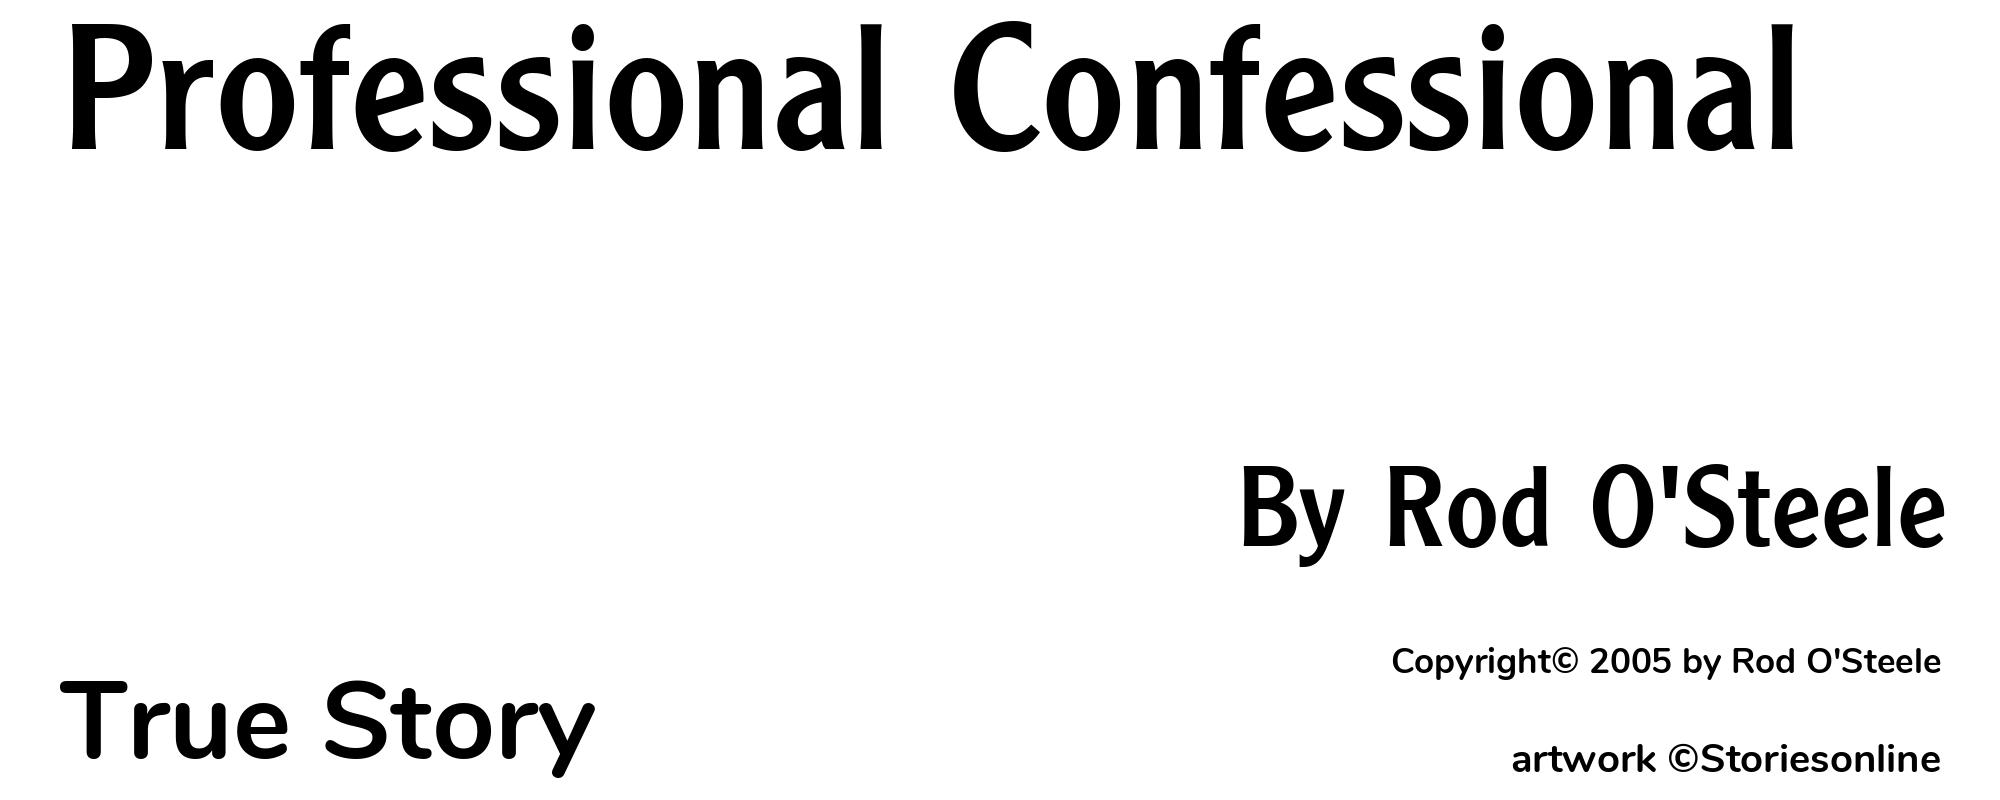 Professional Confessional - Cover